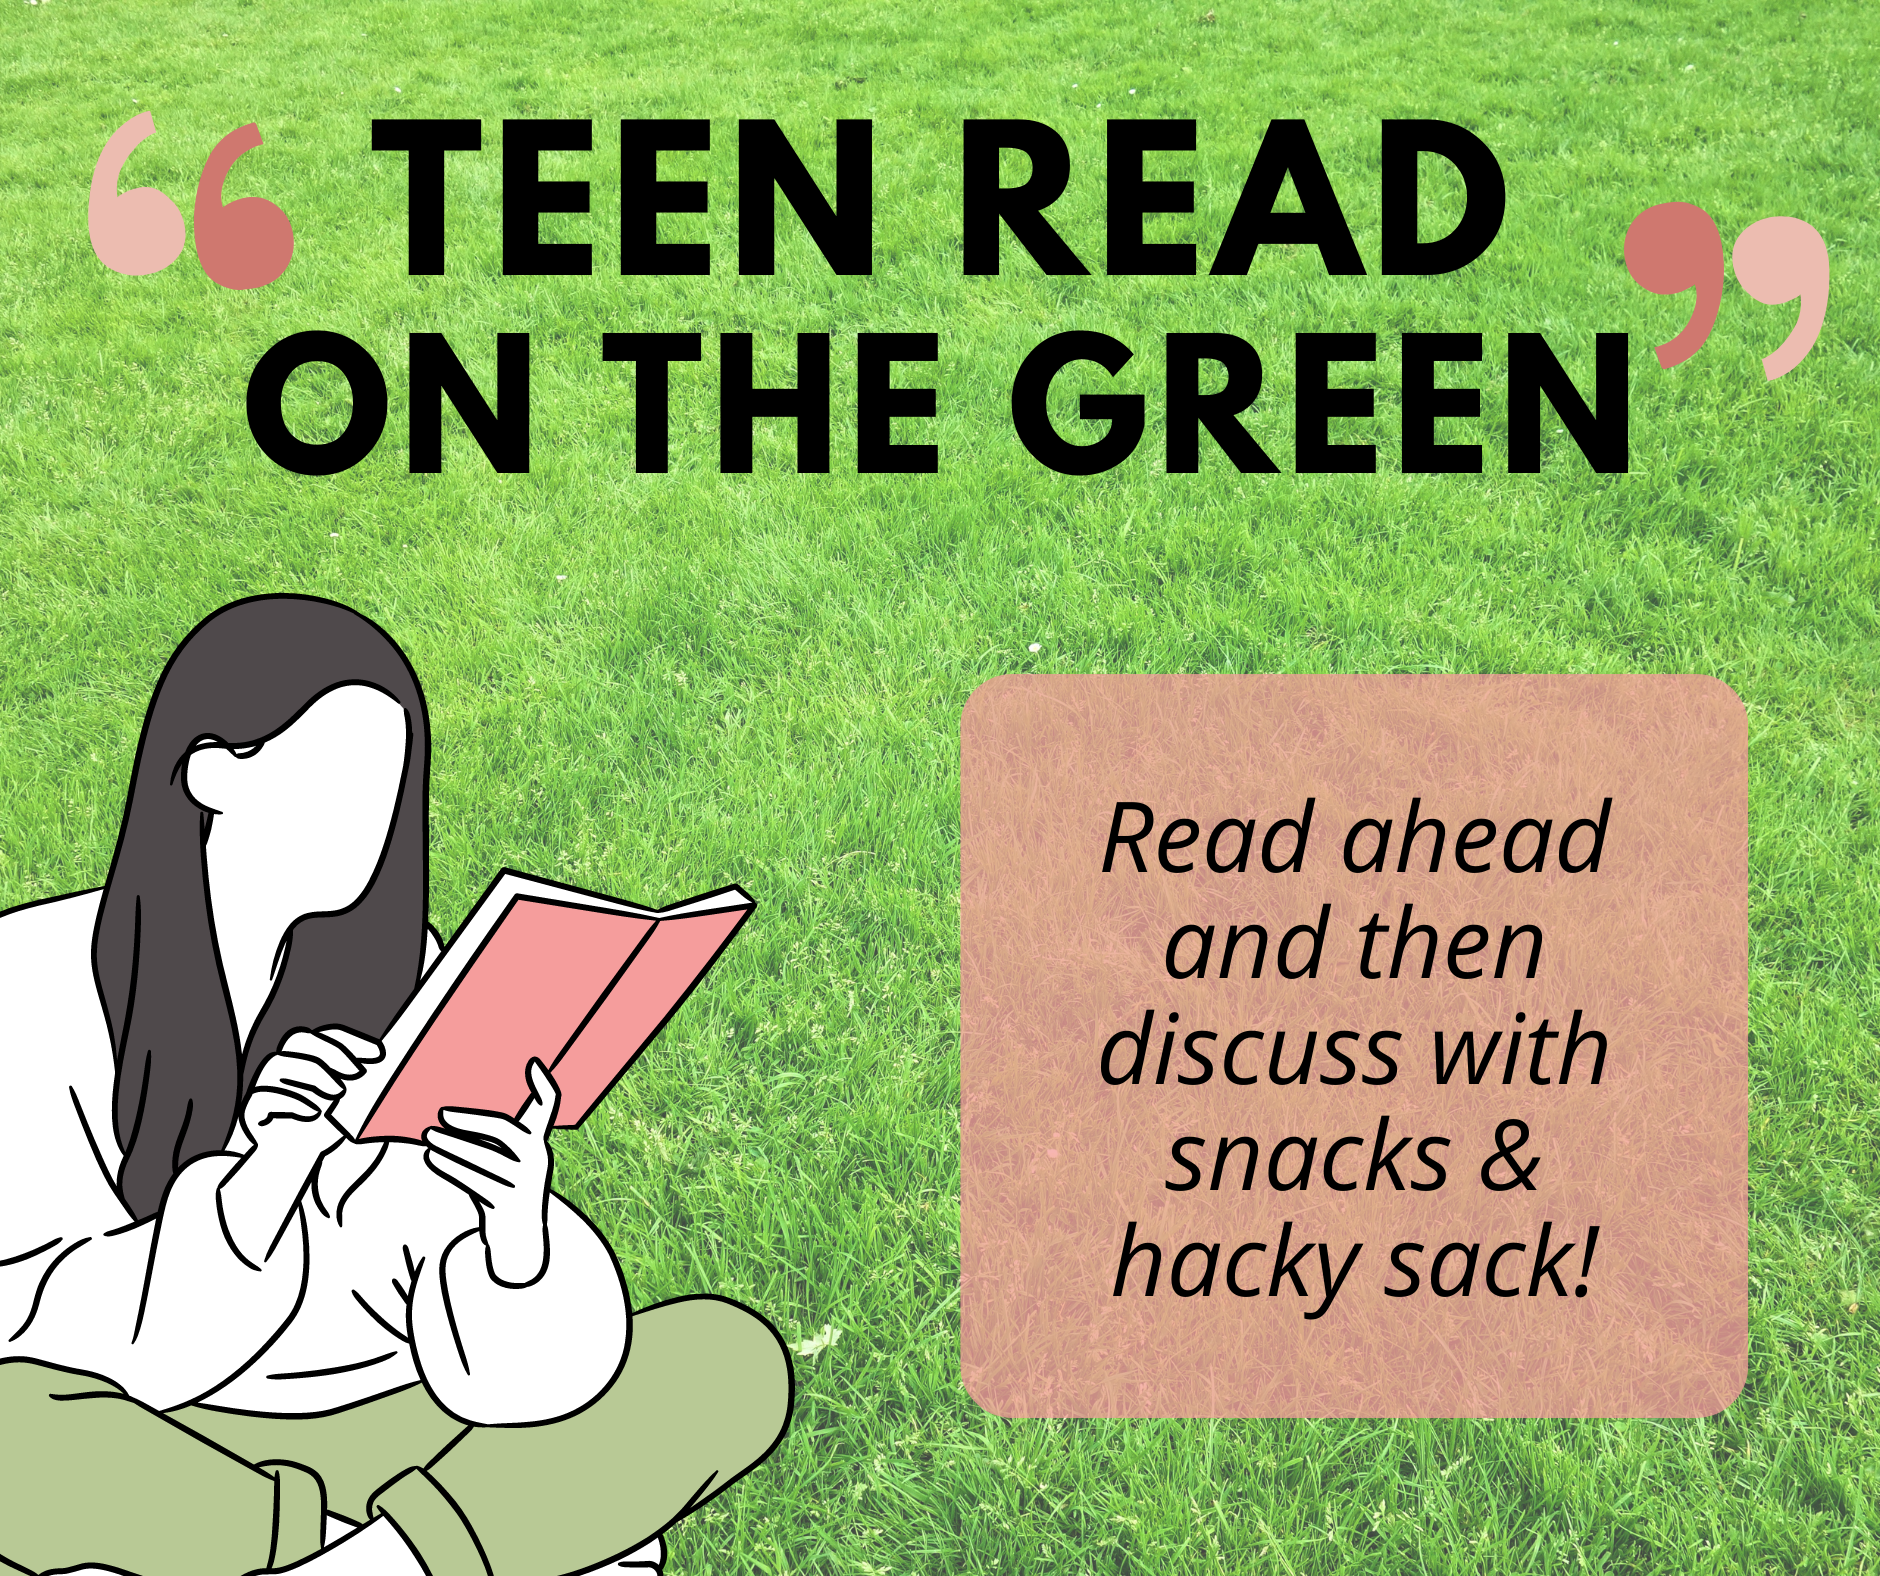 Image of person reading book that says "Teen Read on the Green"